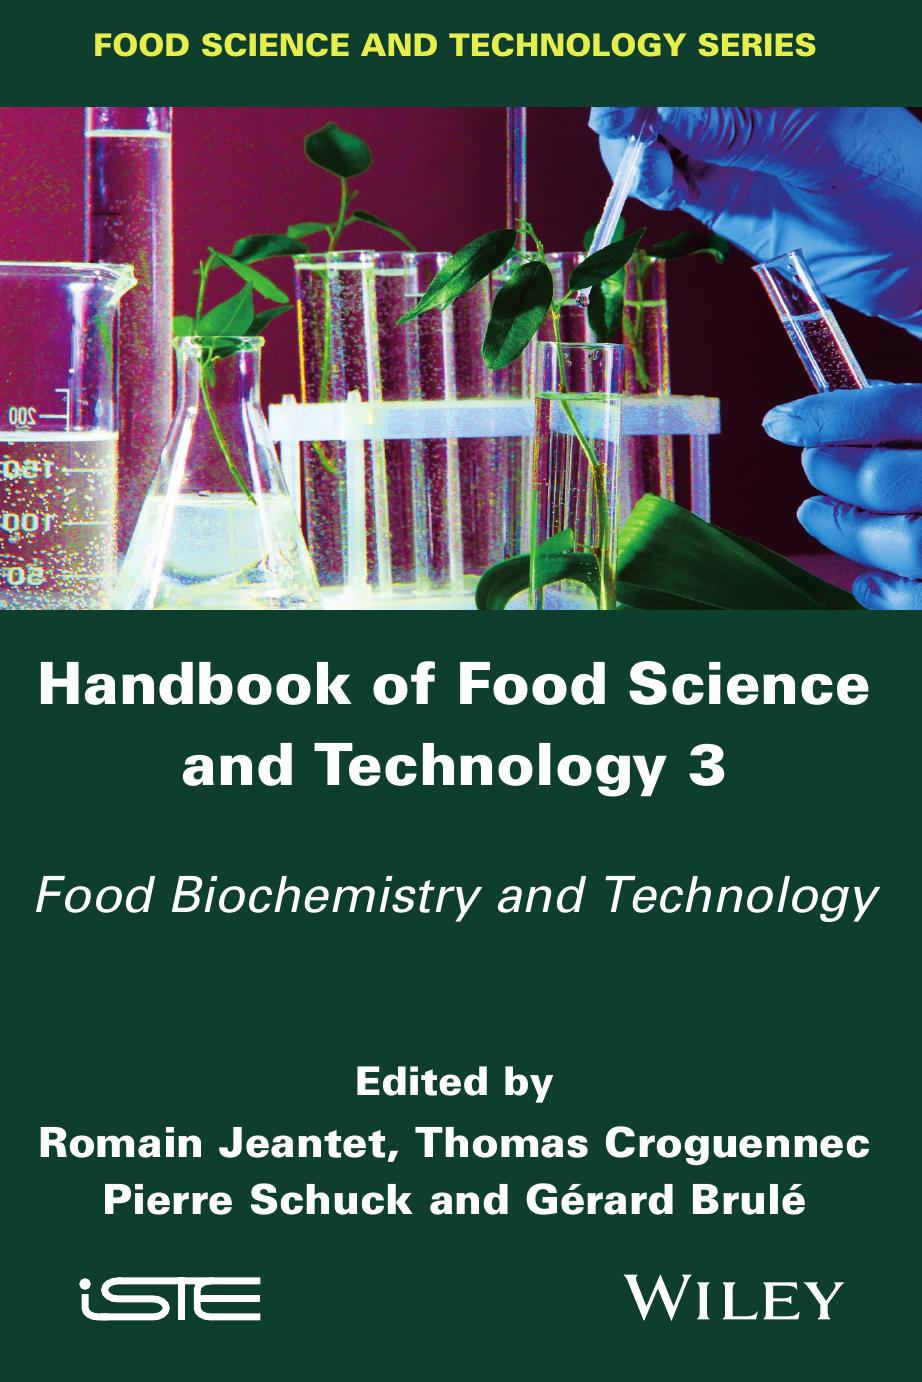 Handbook of Food Science and Technology 3: Food Biochemistry and Technology